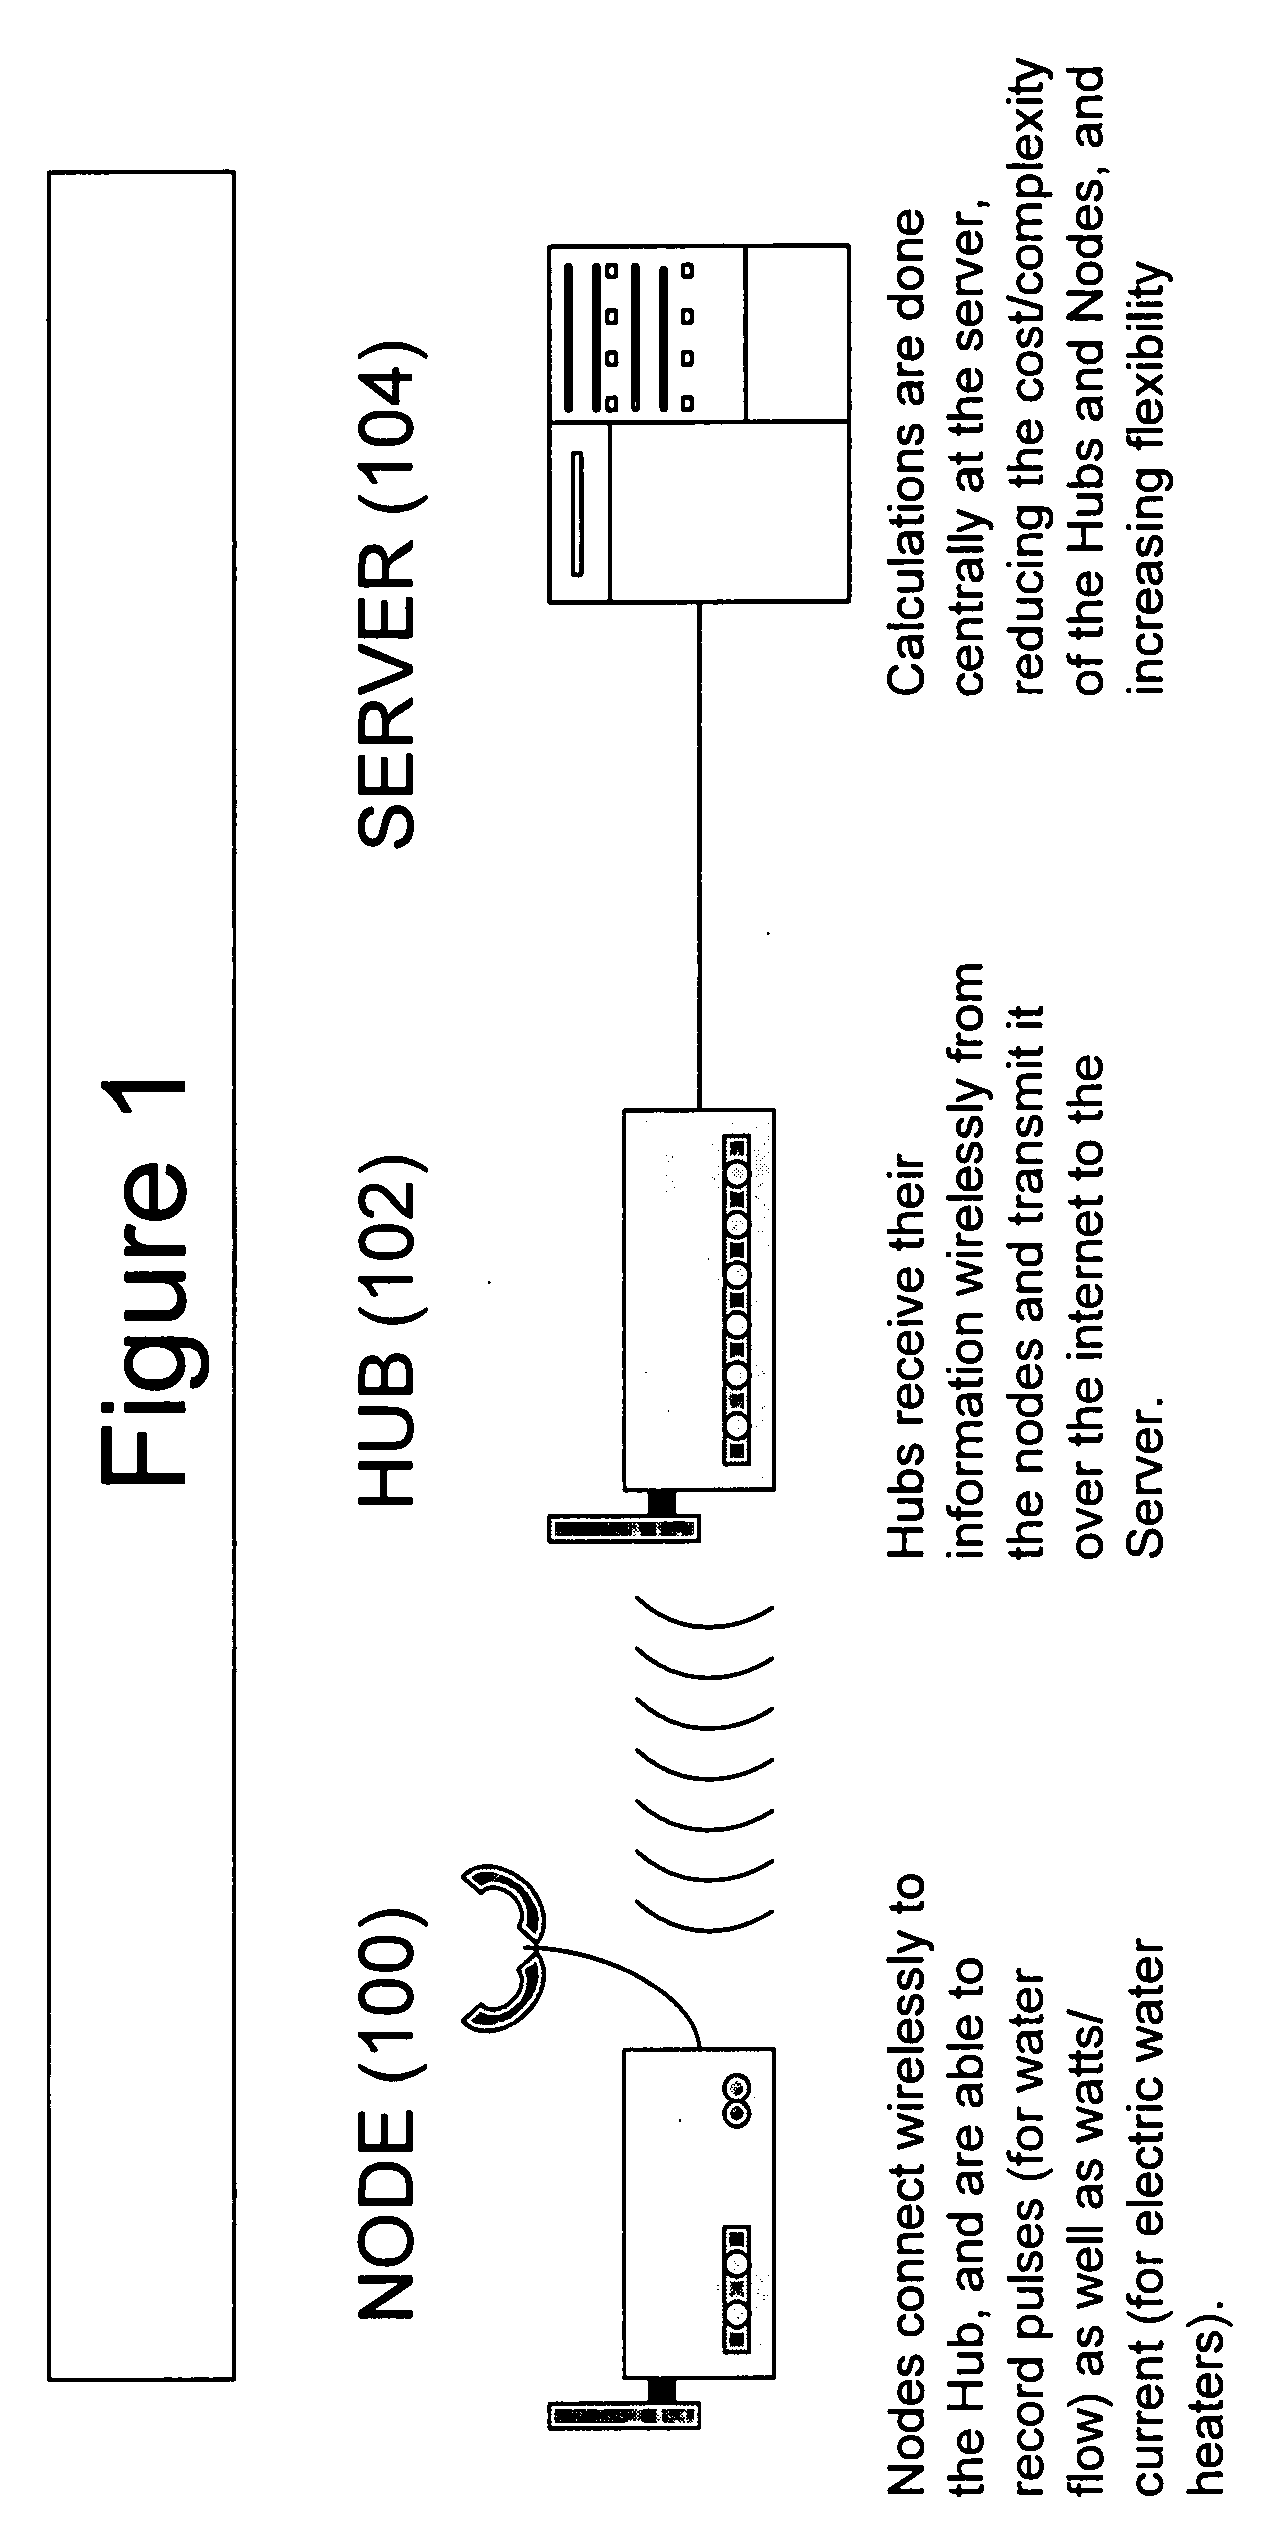 Systems and methods for measuring utilized generation of at-premise renewable power systems